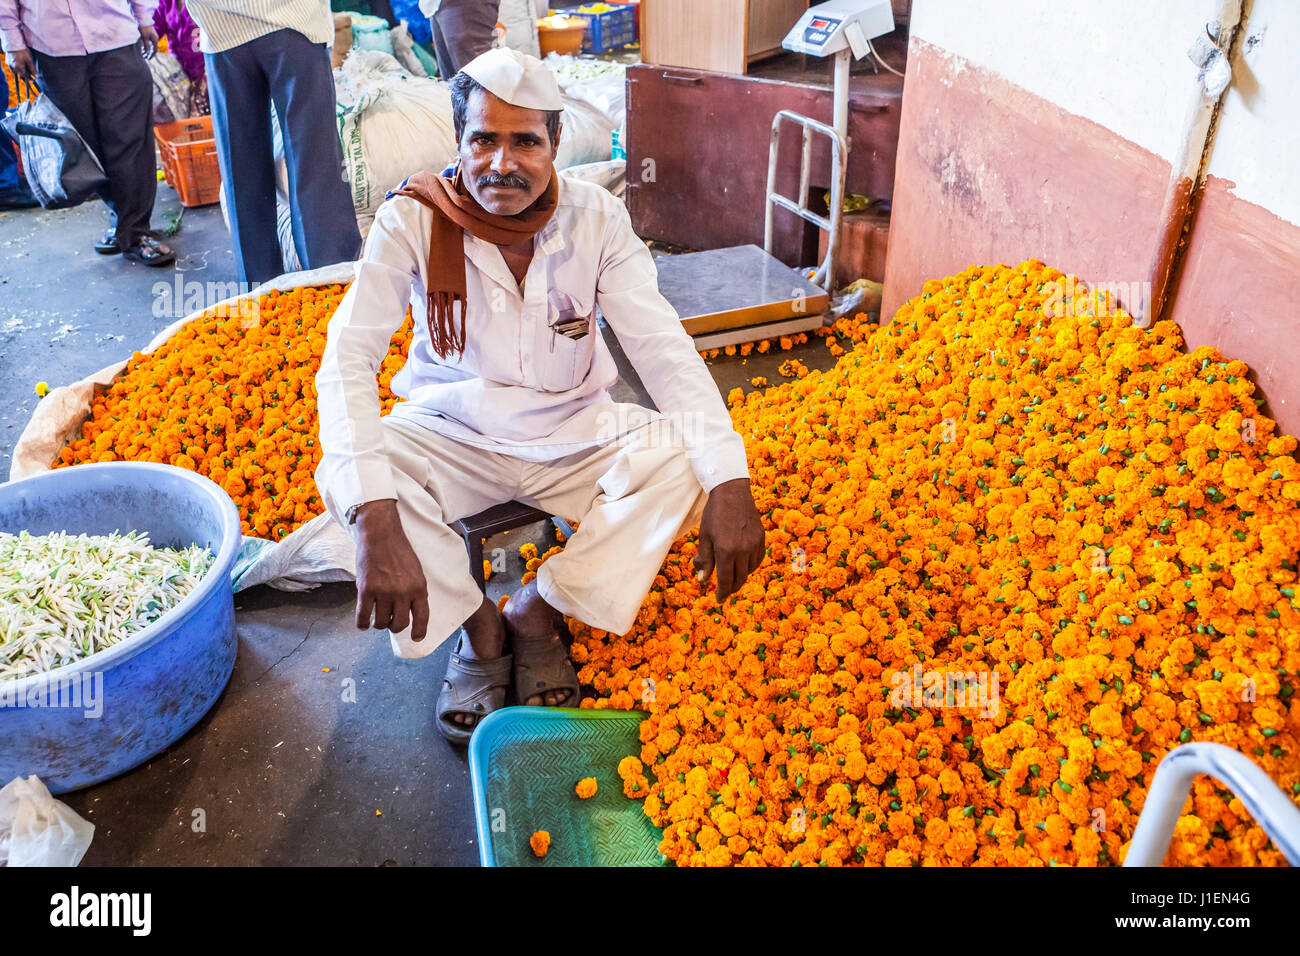 Portrait of a man working in a flower market, Pune, India. Stock Photo